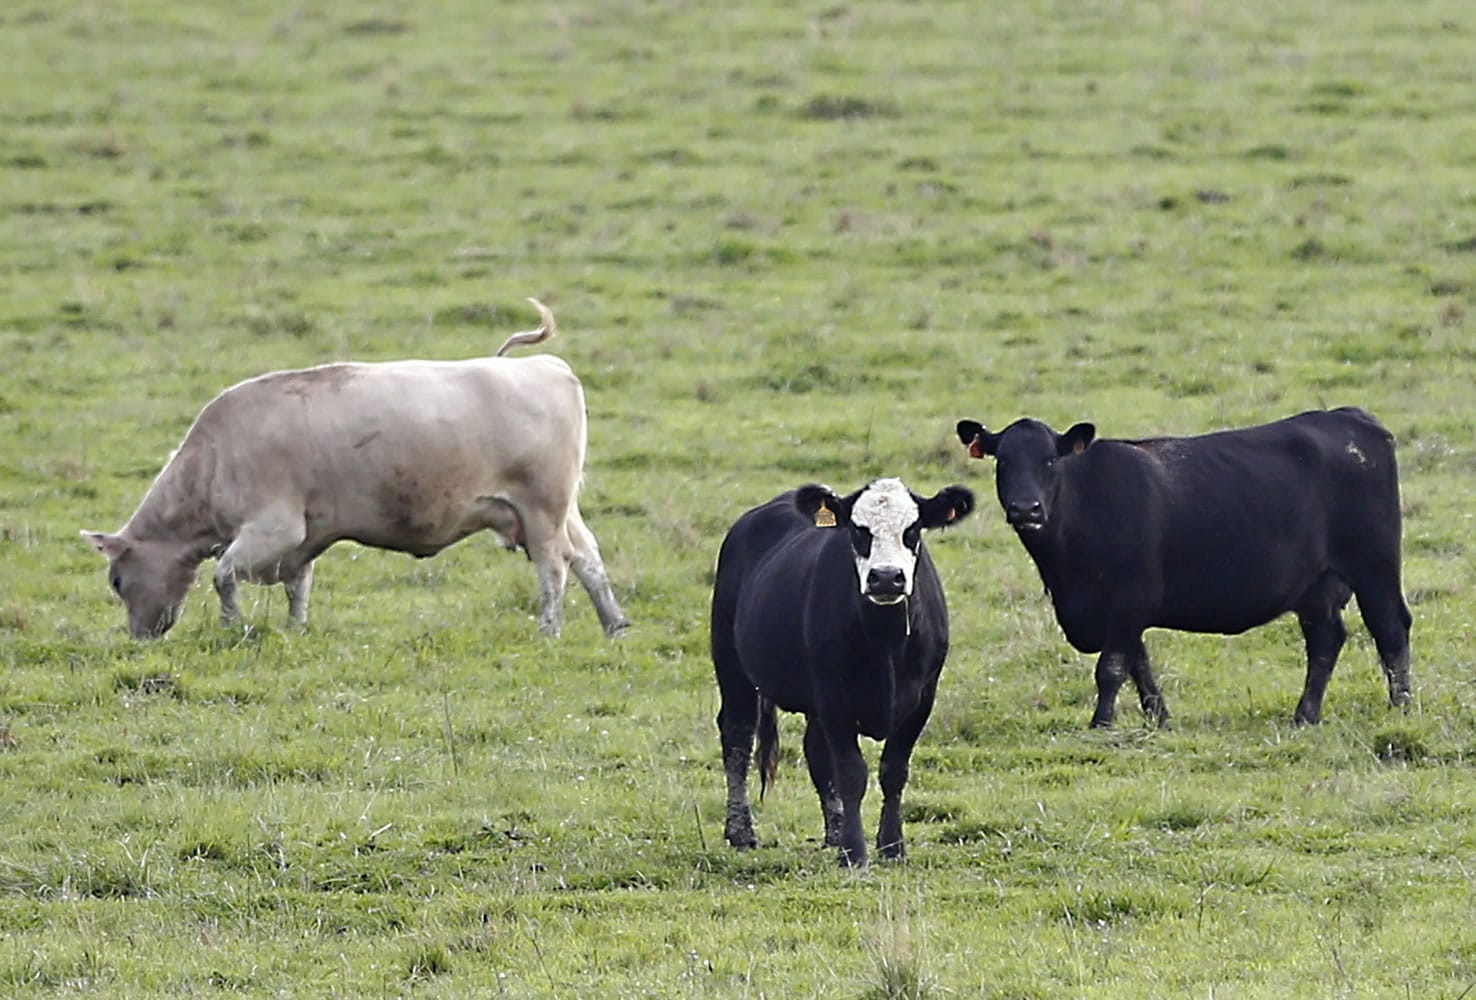 Cattle graze in a field near Sacramento, Calif., on Wednesday. Gov. Jerry Brown announced Saturday that he has signed legislation on limiting the use of antibiotics in healthy livestock.